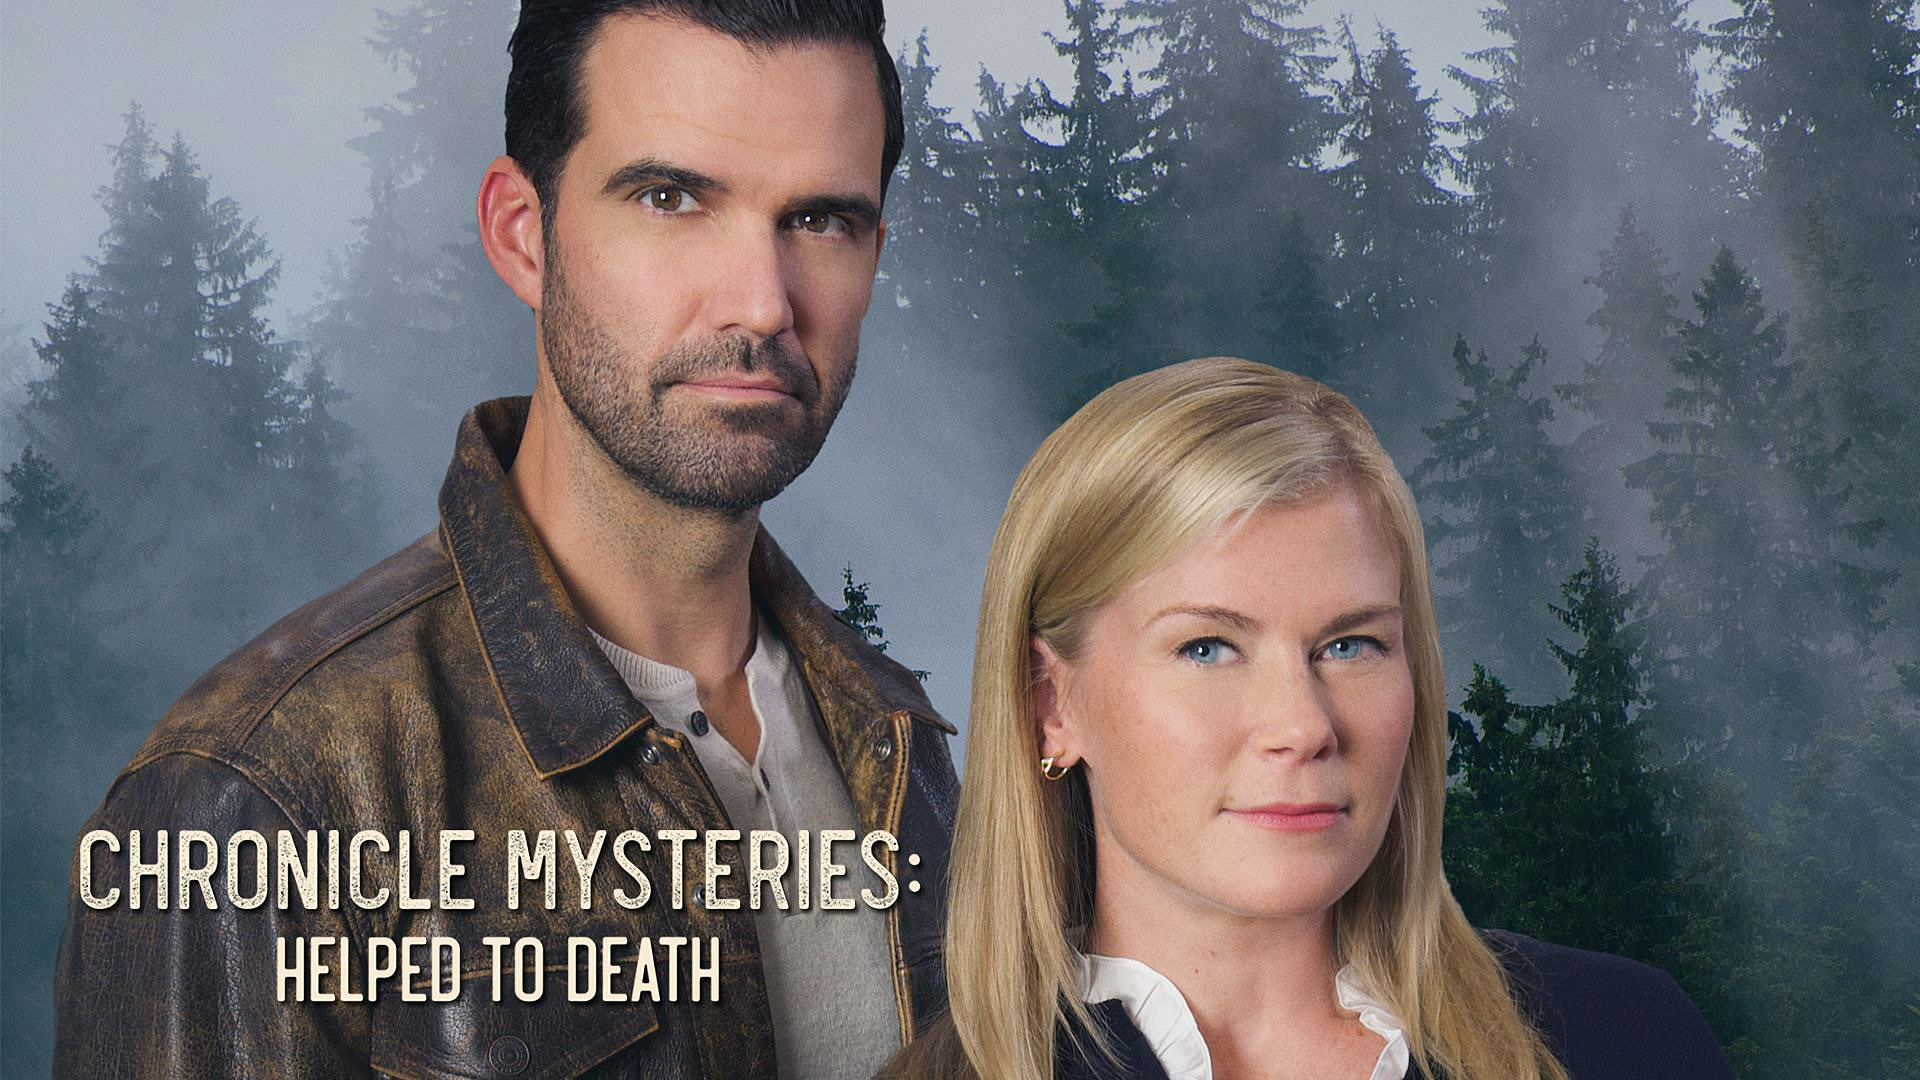 Chronicle Mysteries: Helped To Death